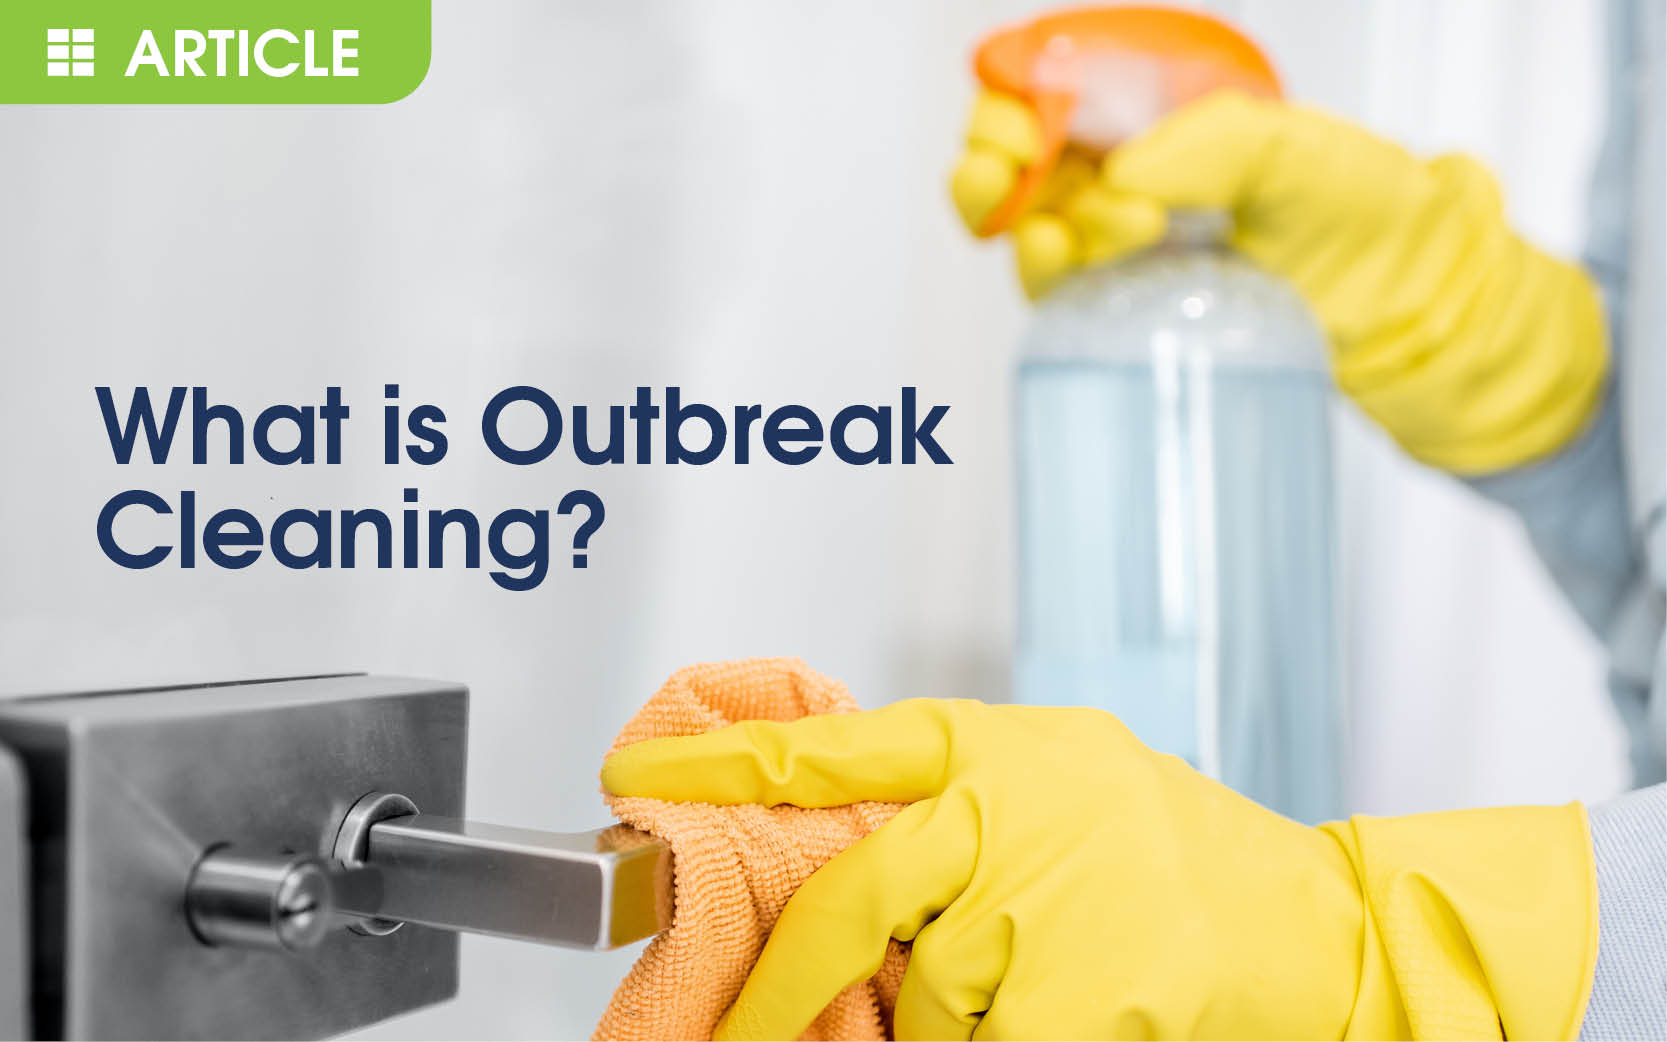 What is Outbreak Cleaning?